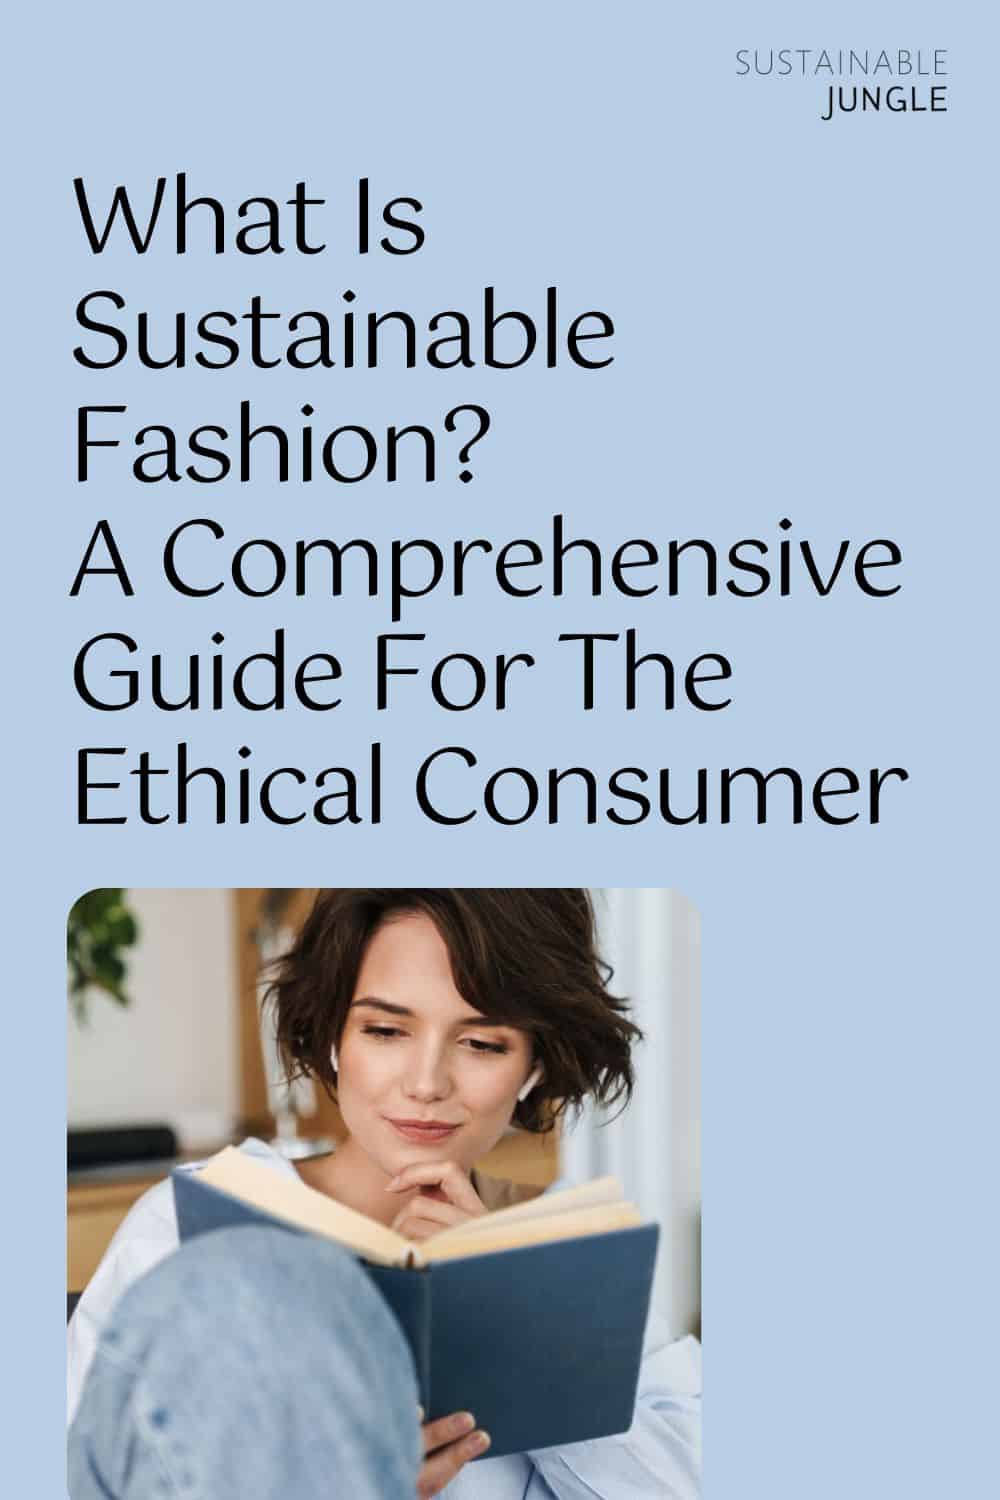 What Is Sustainable Fashion? A Comprehensive Guide For The Ethical Consumer Image by Dean Drobot #whatissustainablefashion #sustainablefashion #whatissustainableandethicalfashion #sustainablefashionindustry #ethicalfashion #sustainabilityinfashion #sustainablejungle